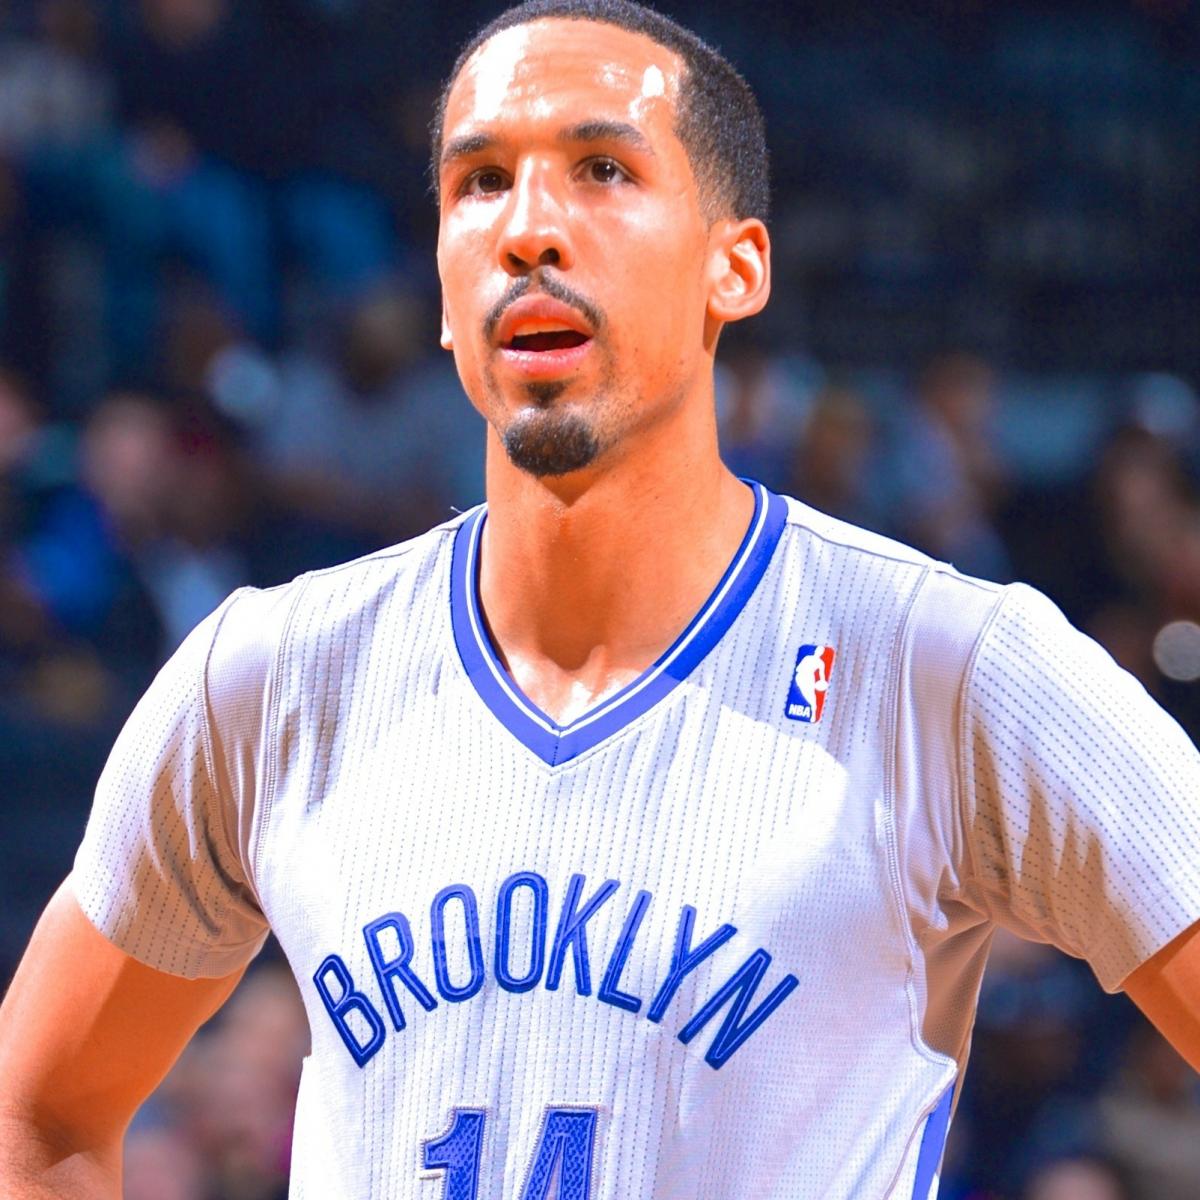 Warriors' Shaun Livingston ruled out for Nets game with foot injury